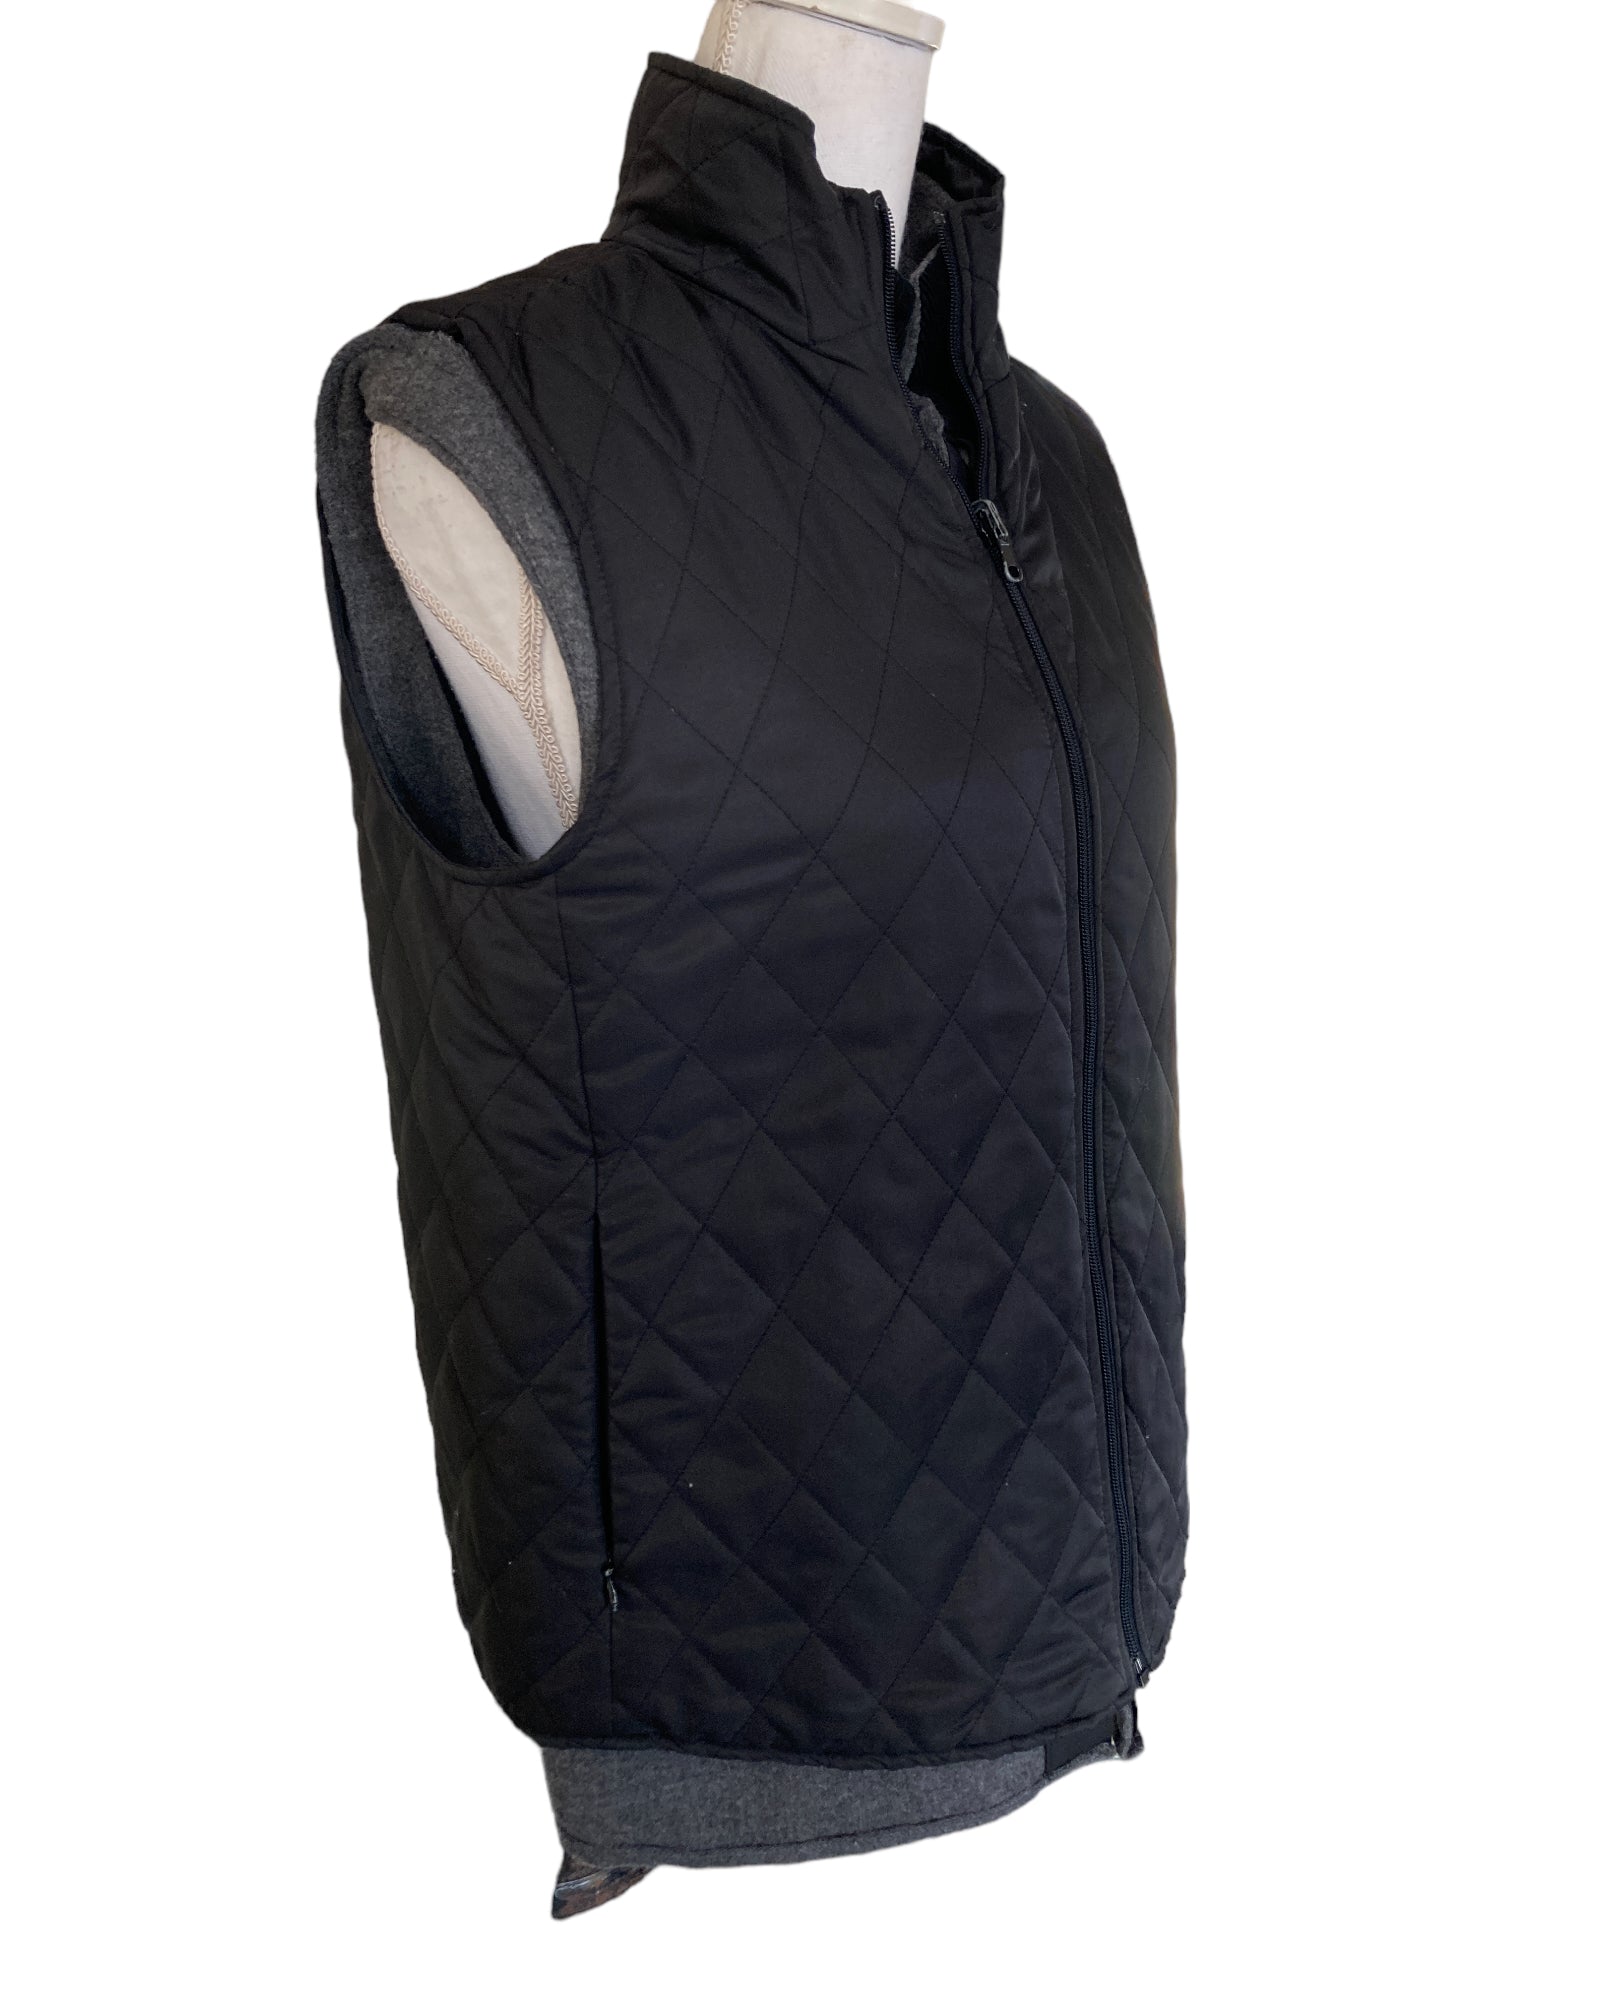 J. McLaughlin Three in One Black and Charcoal Vest, L